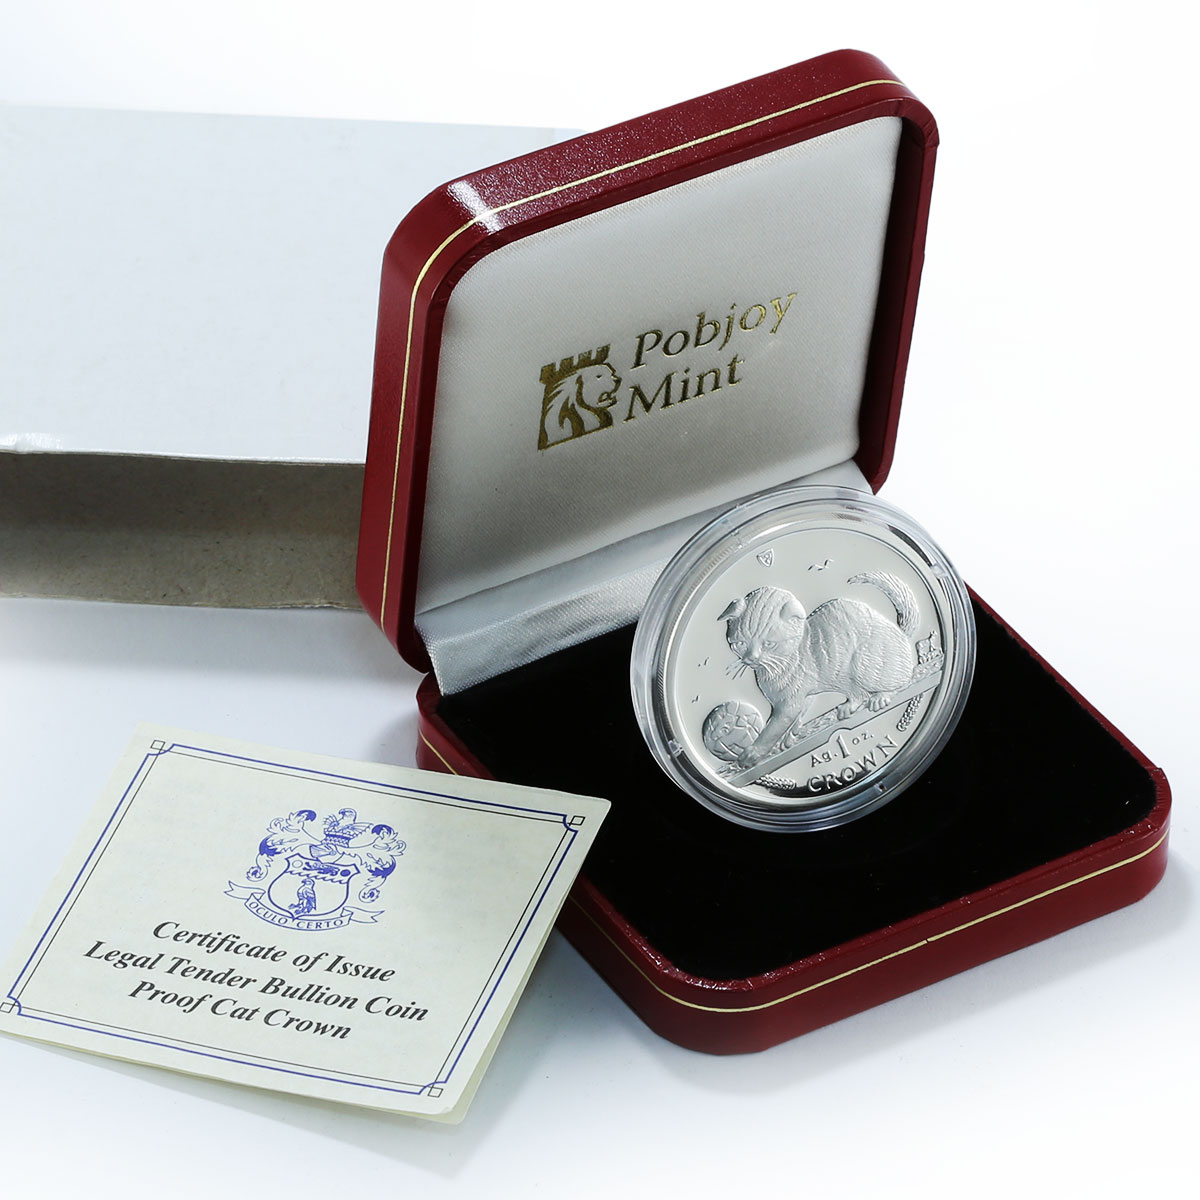 Isle of Man, 1 crown, Scottish Fold cat, silver, proof, coin 2000